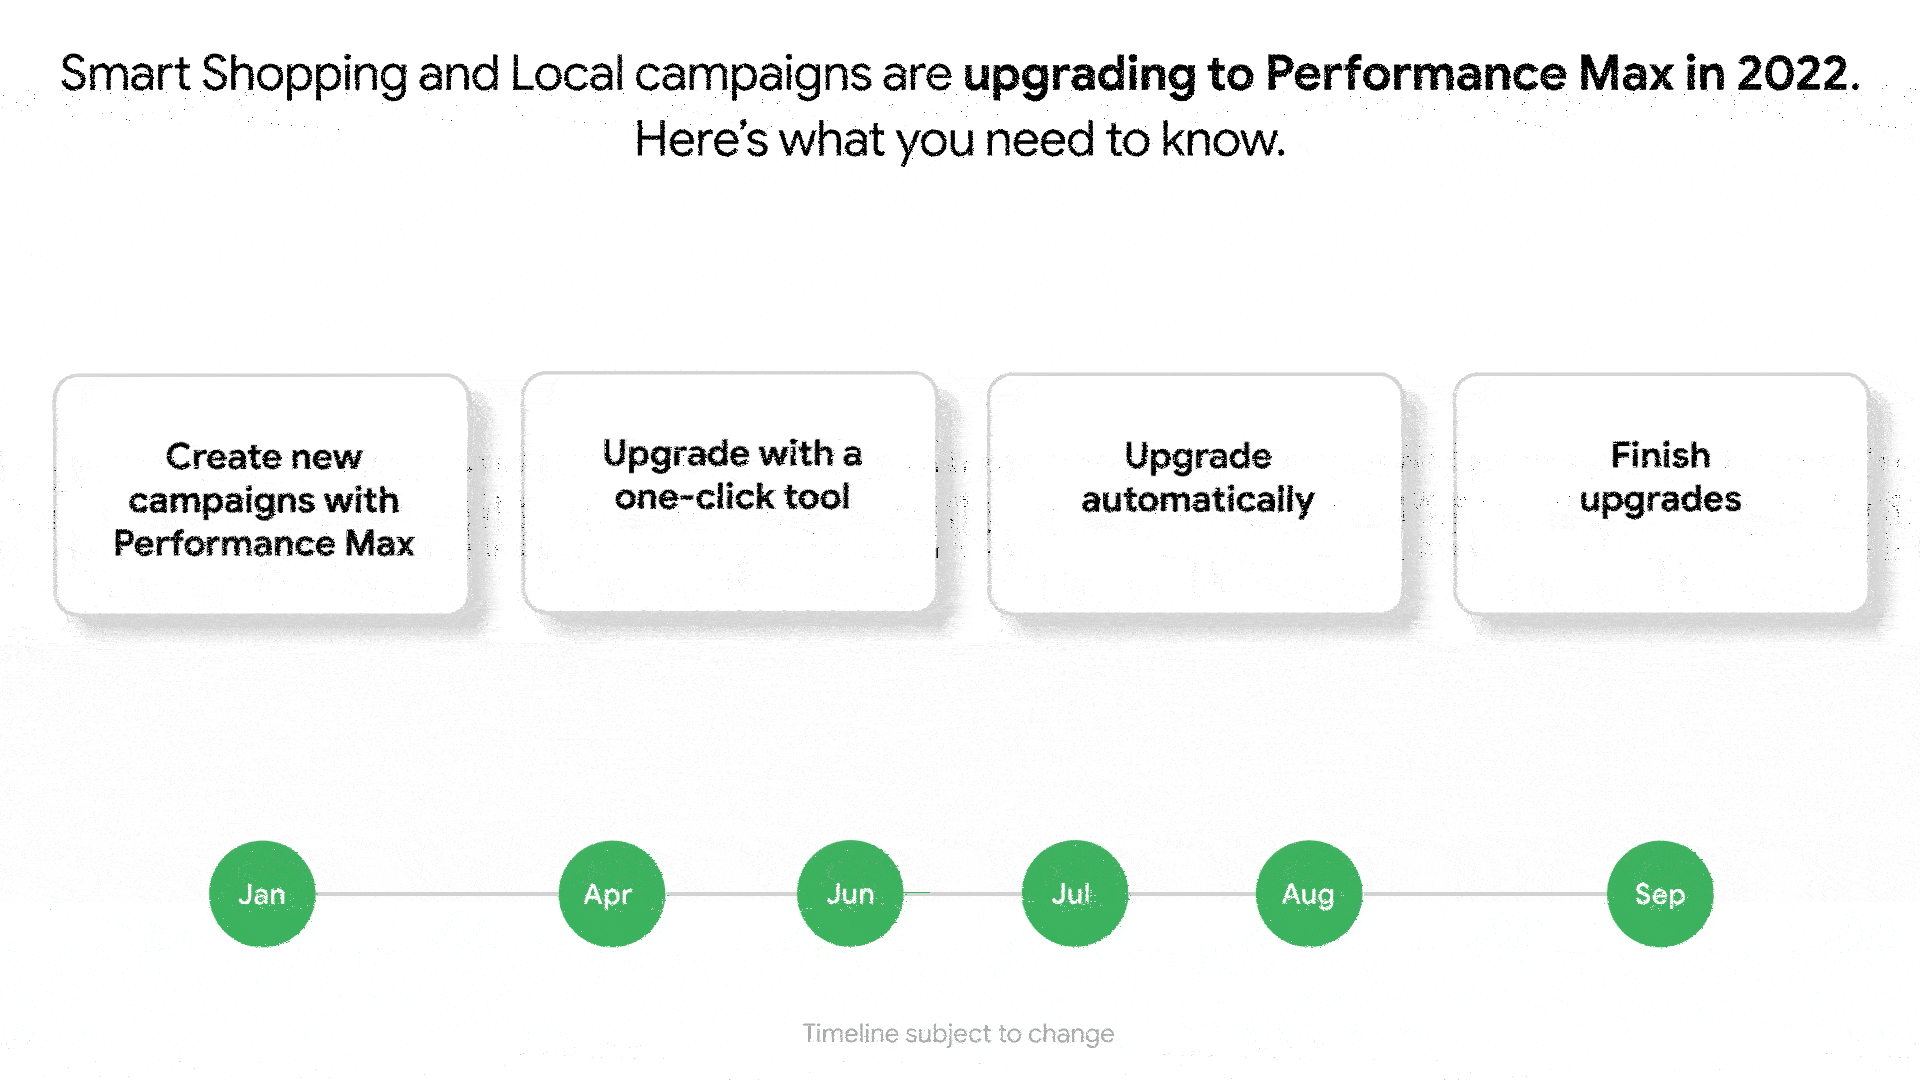 Smart Shopping And Local Campaign Upgrades To Performance Max